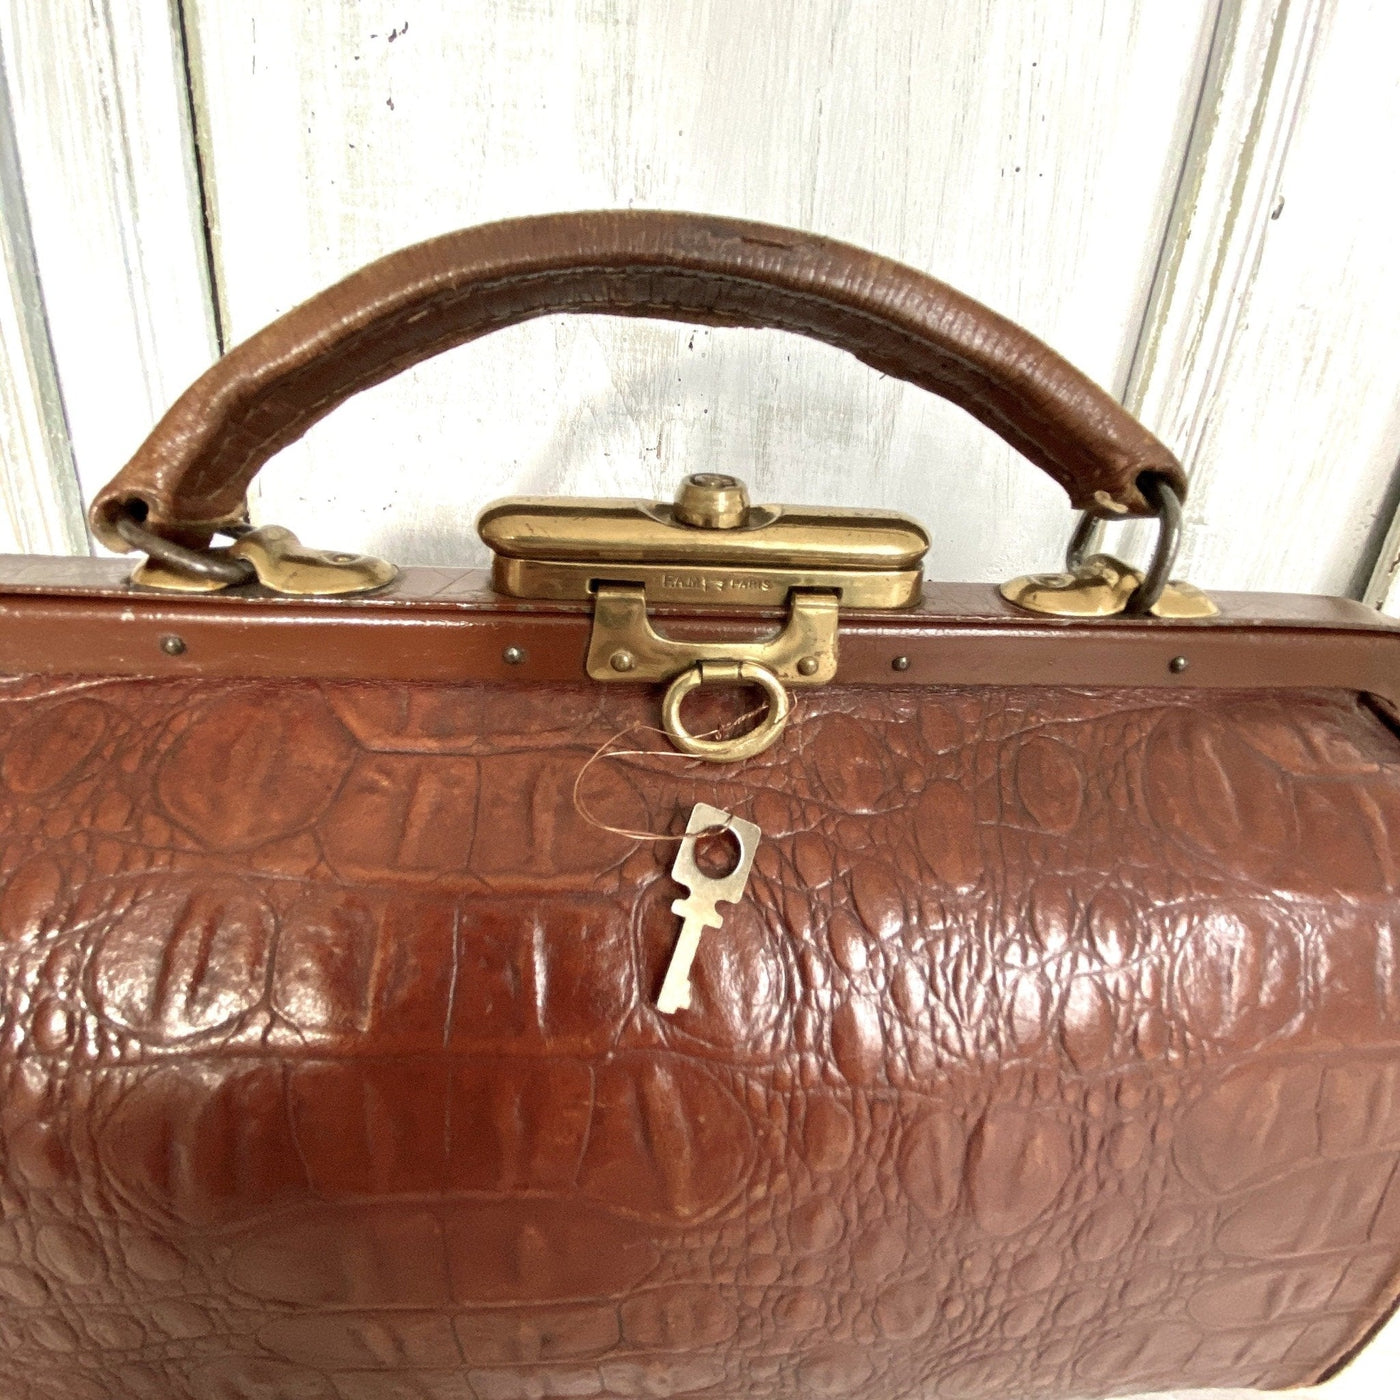 Early 20th Century Crocodile Suitcase in Antique Luggage & Bags